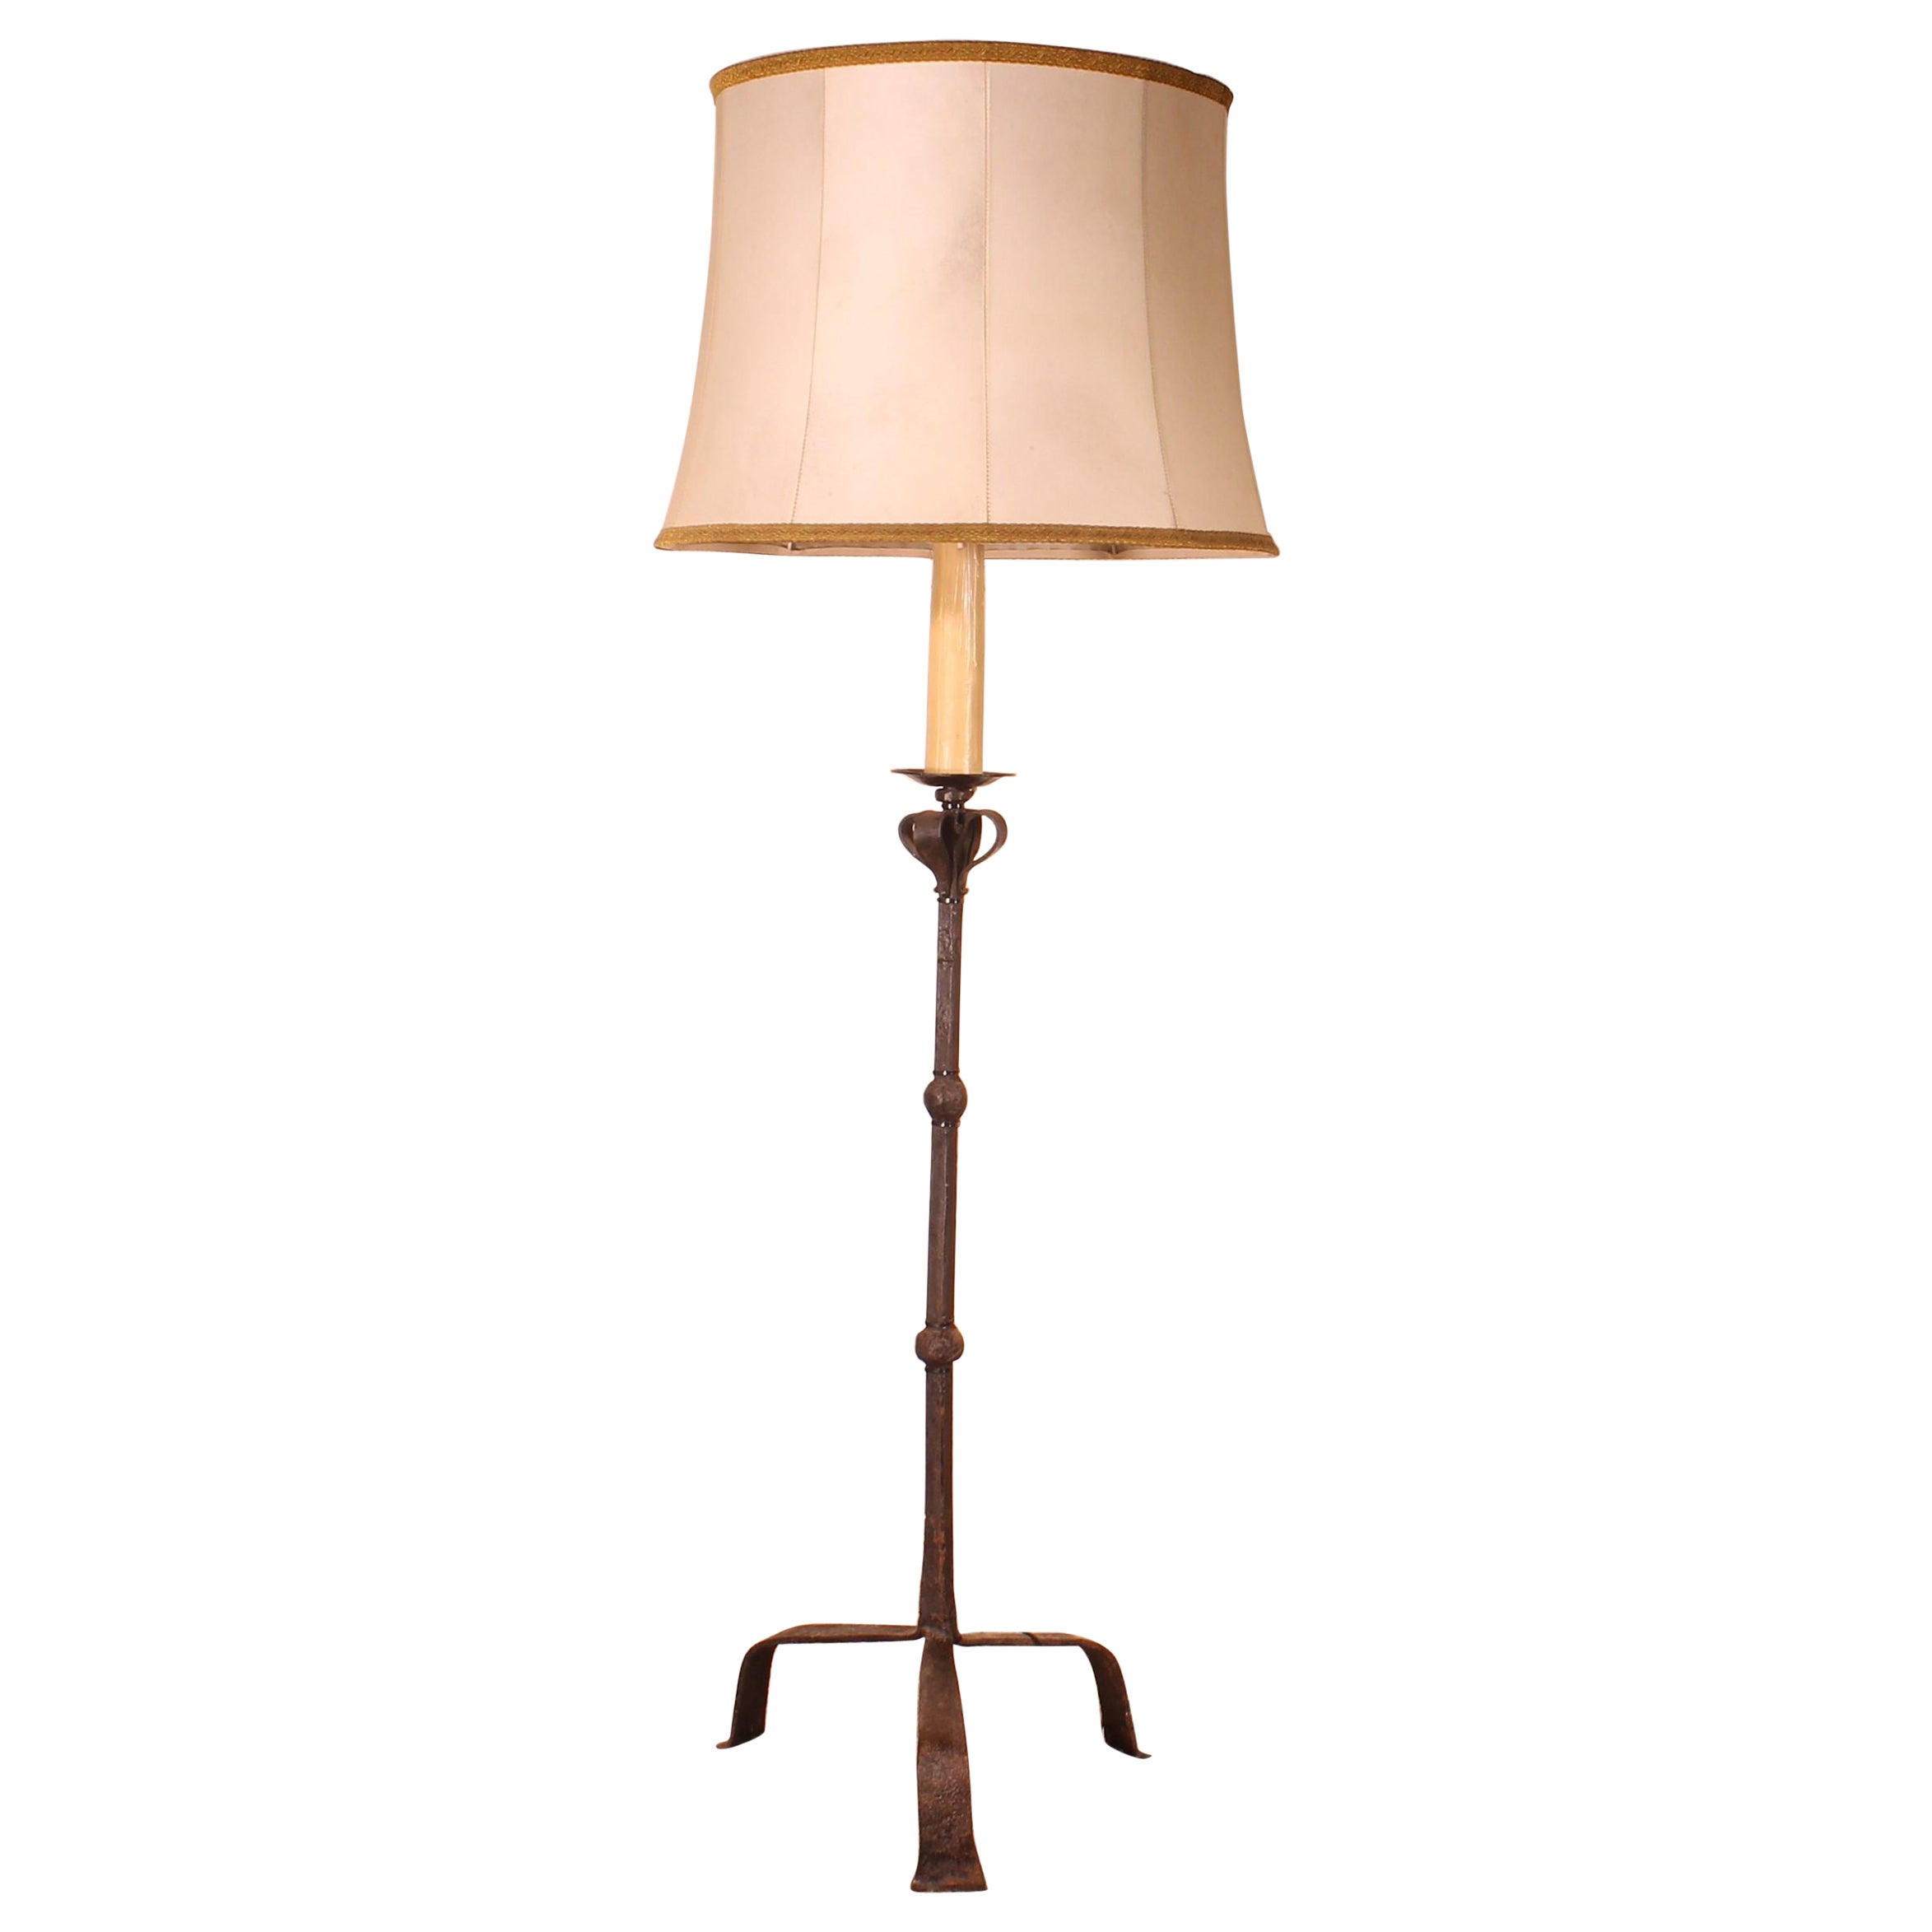 Torchiere or Floor Lamp in Wrought Iron with a Lampshade in Goatskin